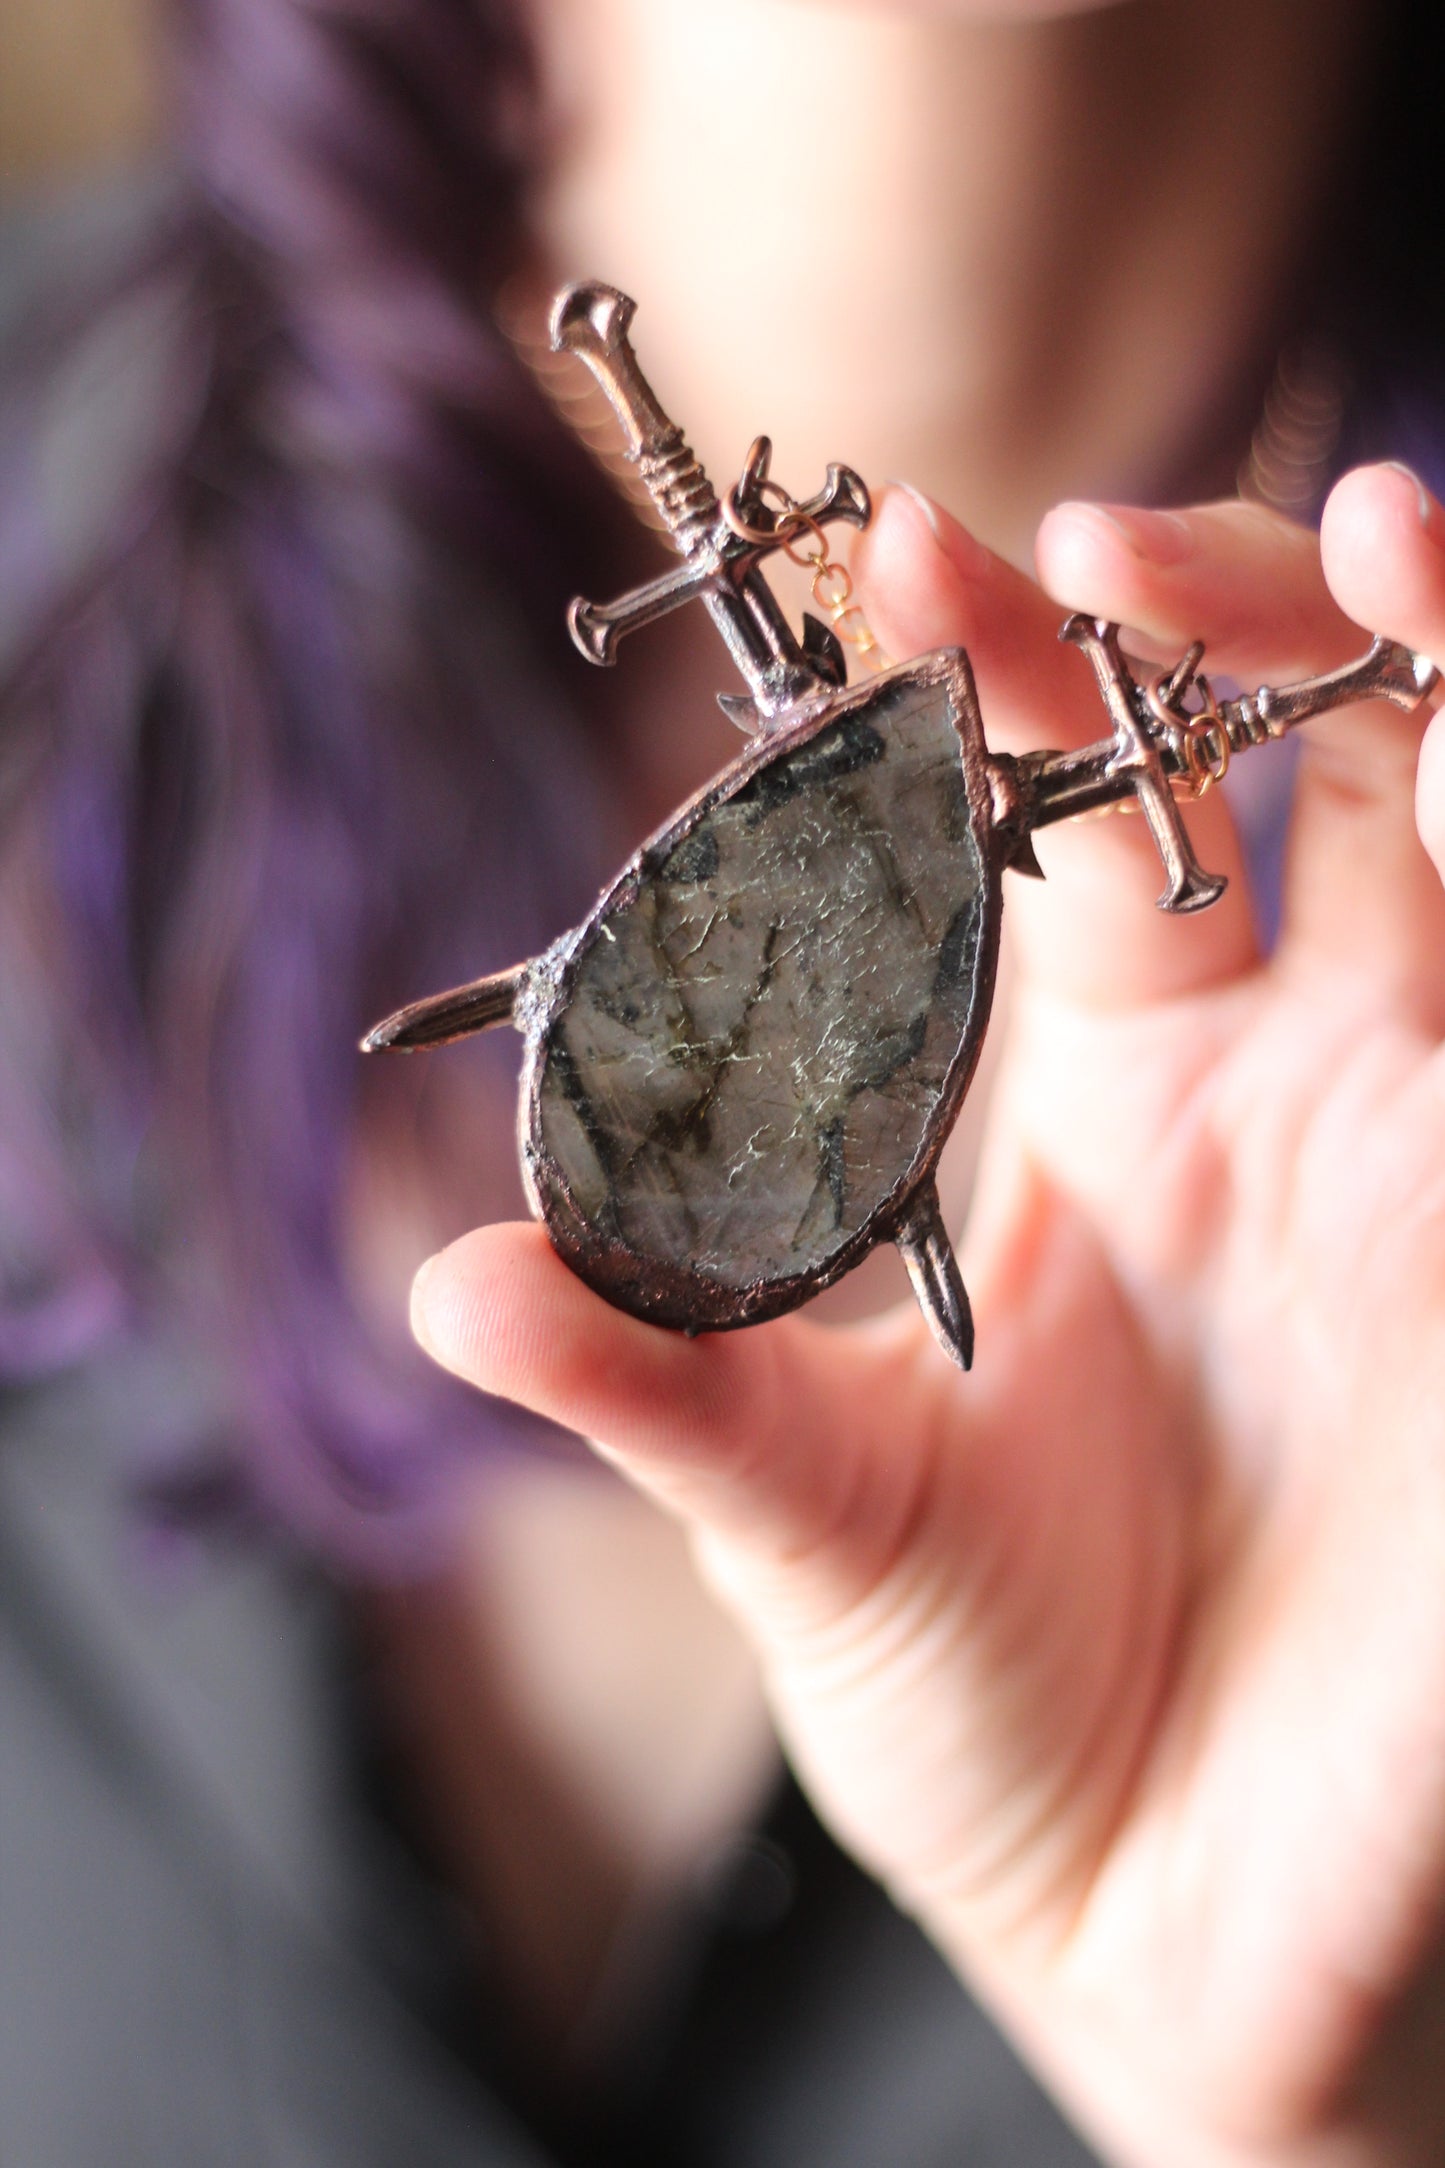 The Sword Suit: Purple Labradorite with Sword and Moon Copper Pendant